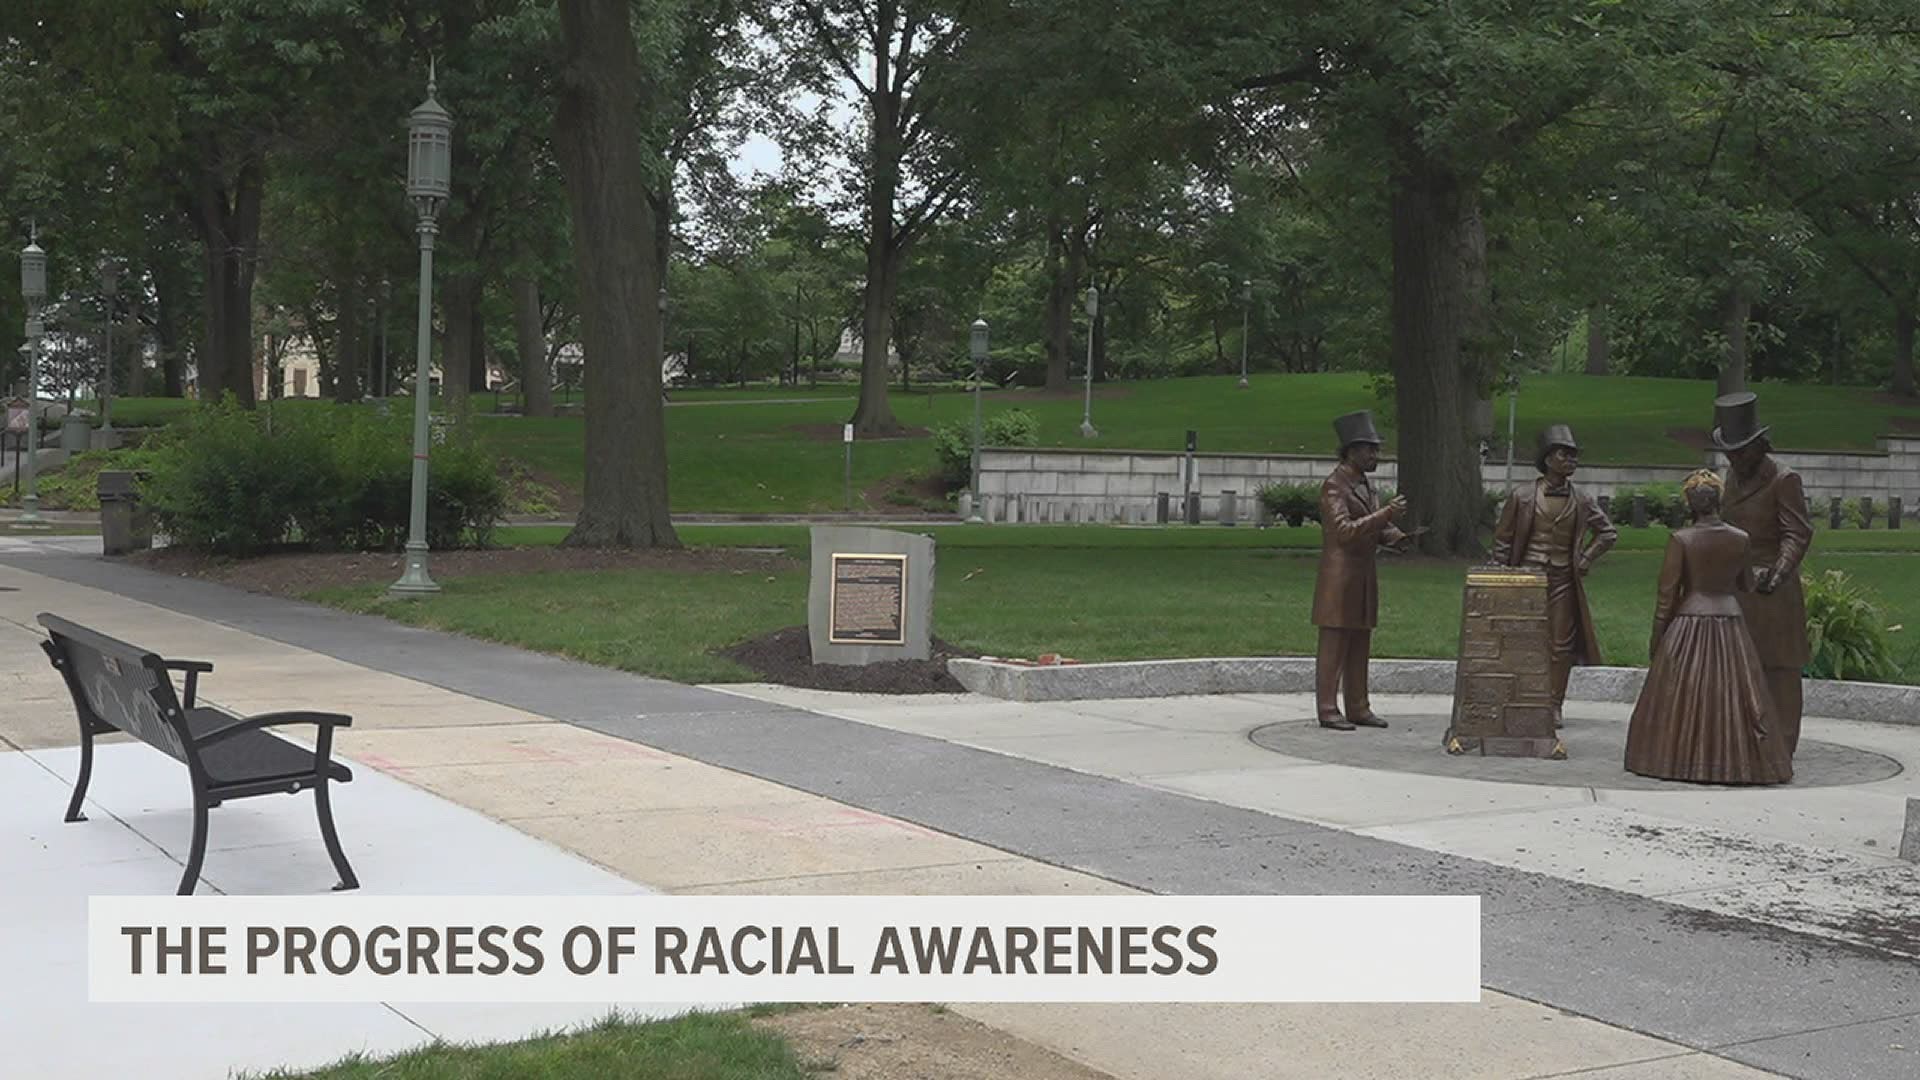 "This is 2021, we're still having many of the same issues that we've had when it comes to systemic racism," said President Allen of the Harrisburg NAACP